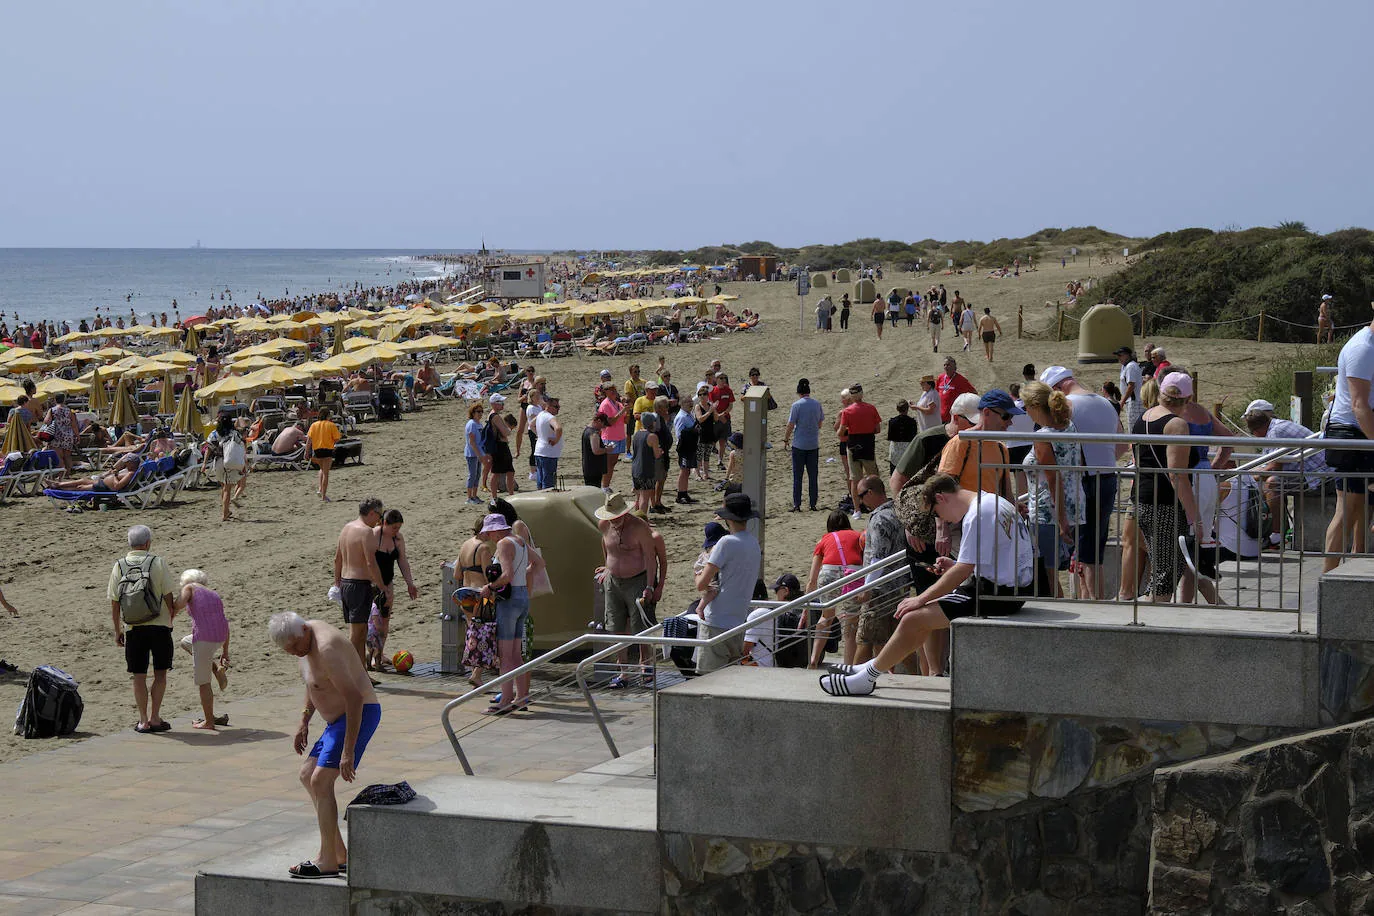 Secondary image 1 - Image of the Playa del Inglés area in Gran Canaria.